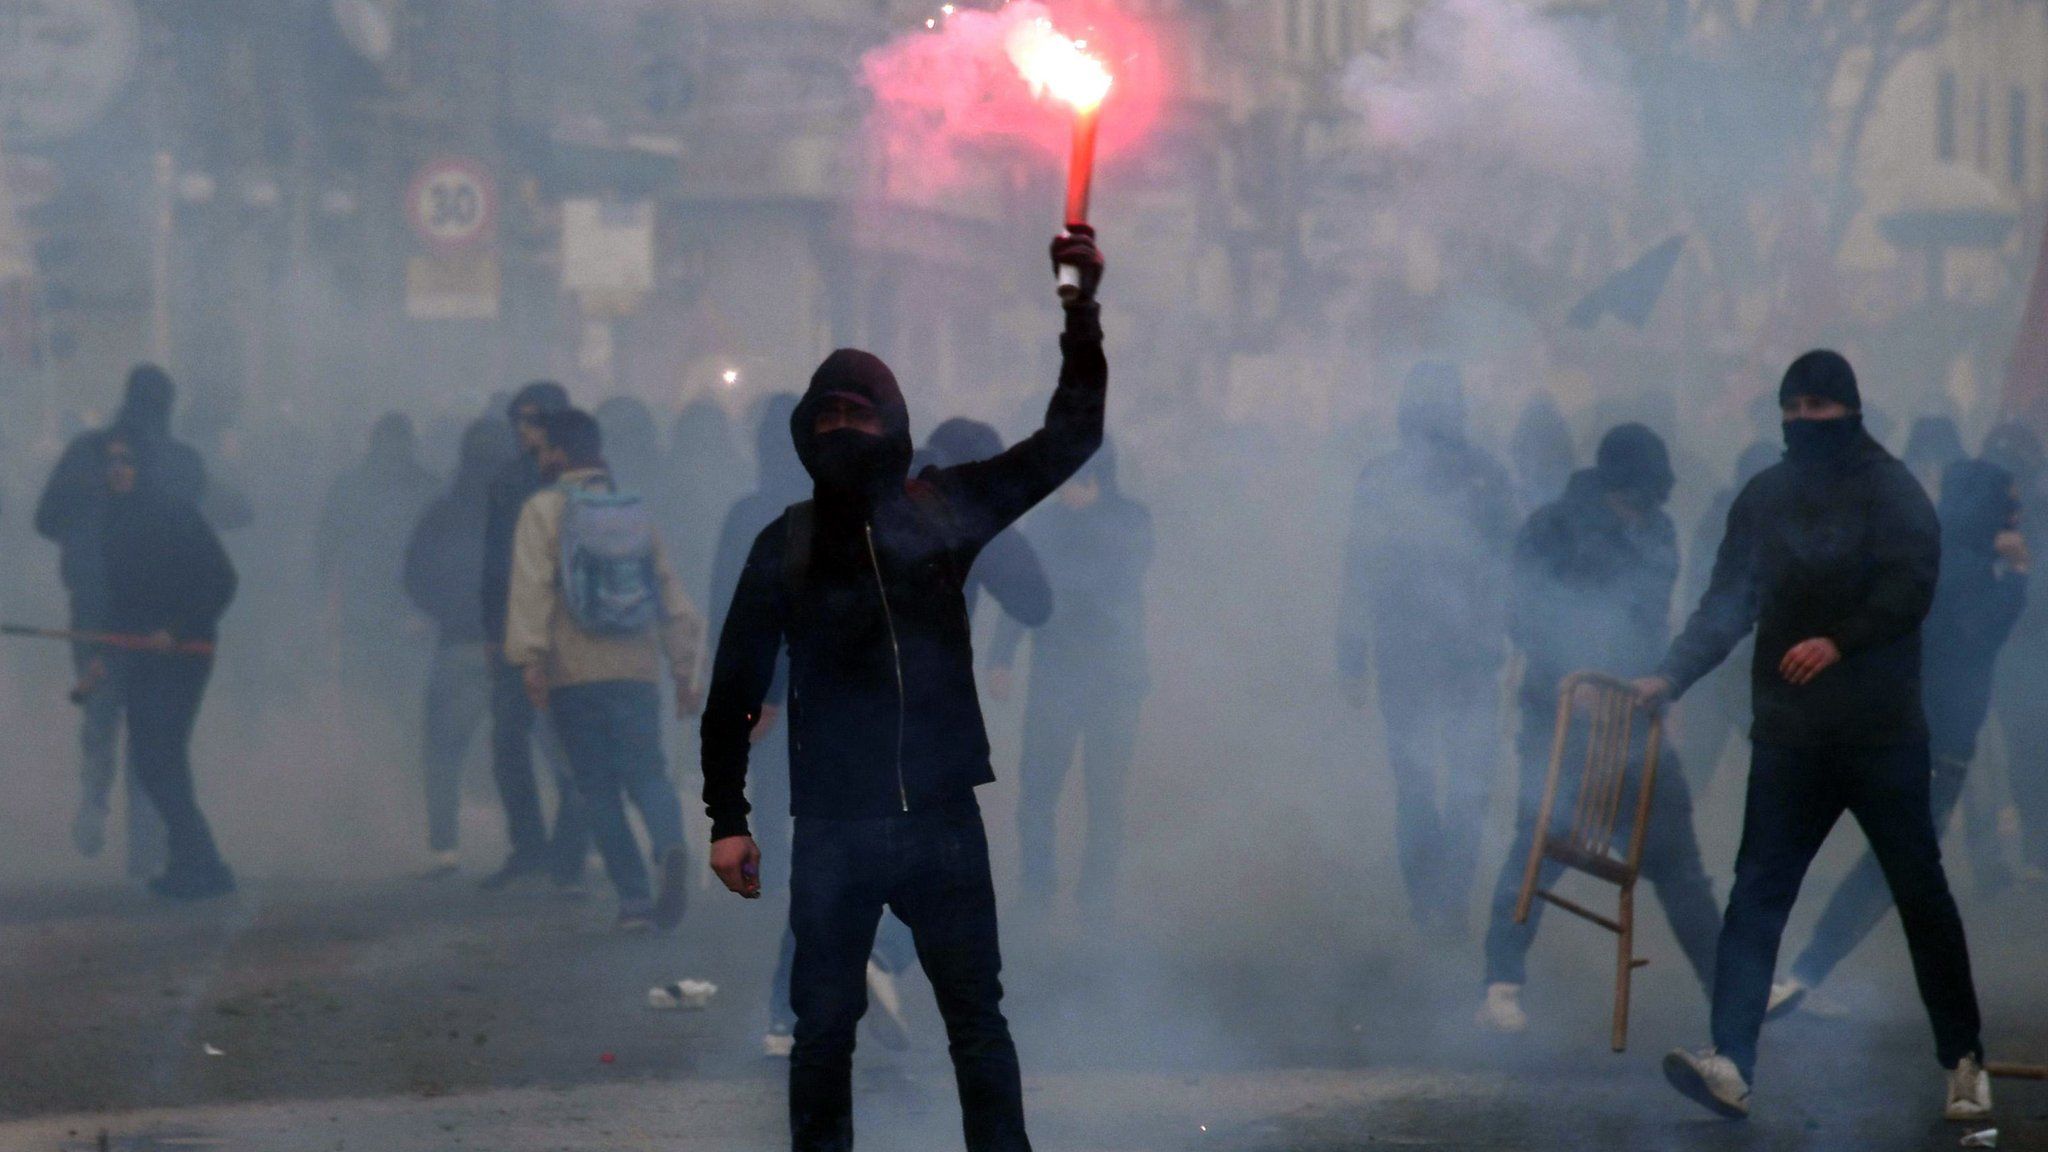 A protester holds a flare during clashes with riot police at a demonstration against the visit of the leader of the Northern League party Matteo Salvini, in Naples, Italy, 11 March 2017